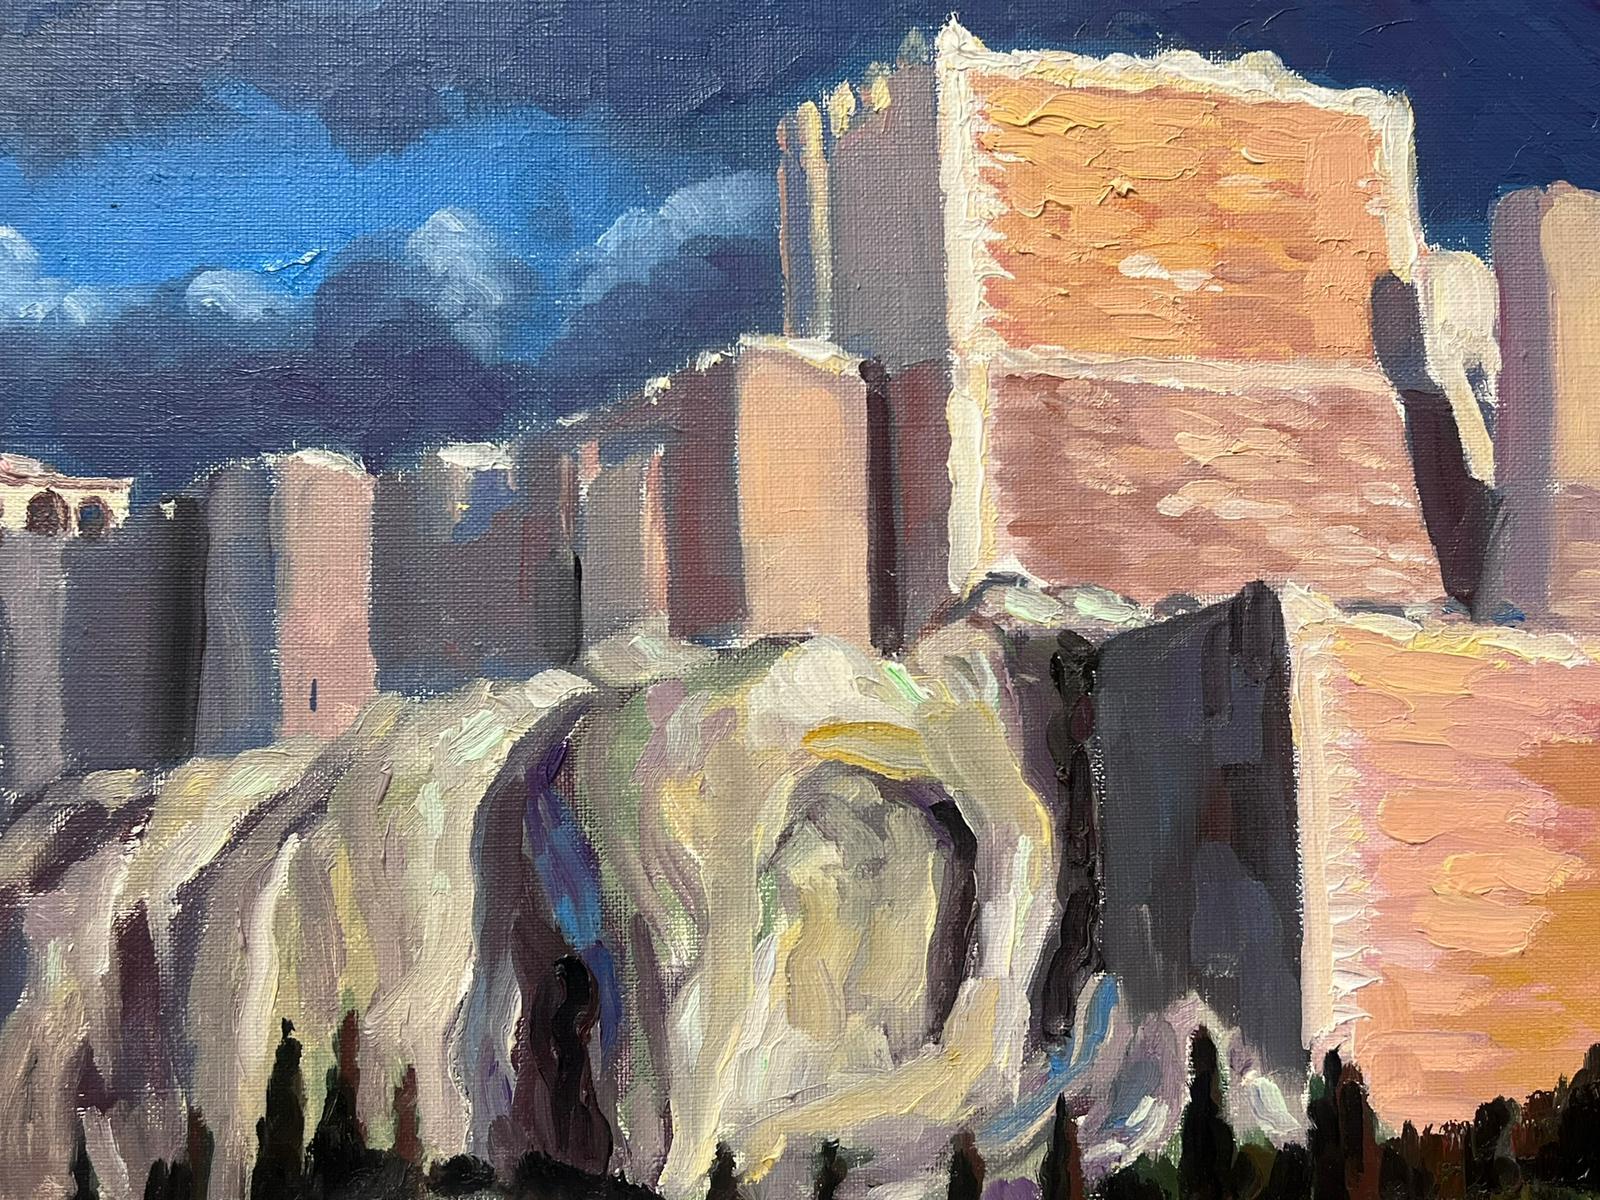 The Ancient Fortress
by Georges Bordonave (French contemporary)  
signed oil painting on canvas, unframed
dated 1994
canvas: 18 x 21.75 inches
condition: very good
provenance: from a large private collection of this artists work, western Paris,